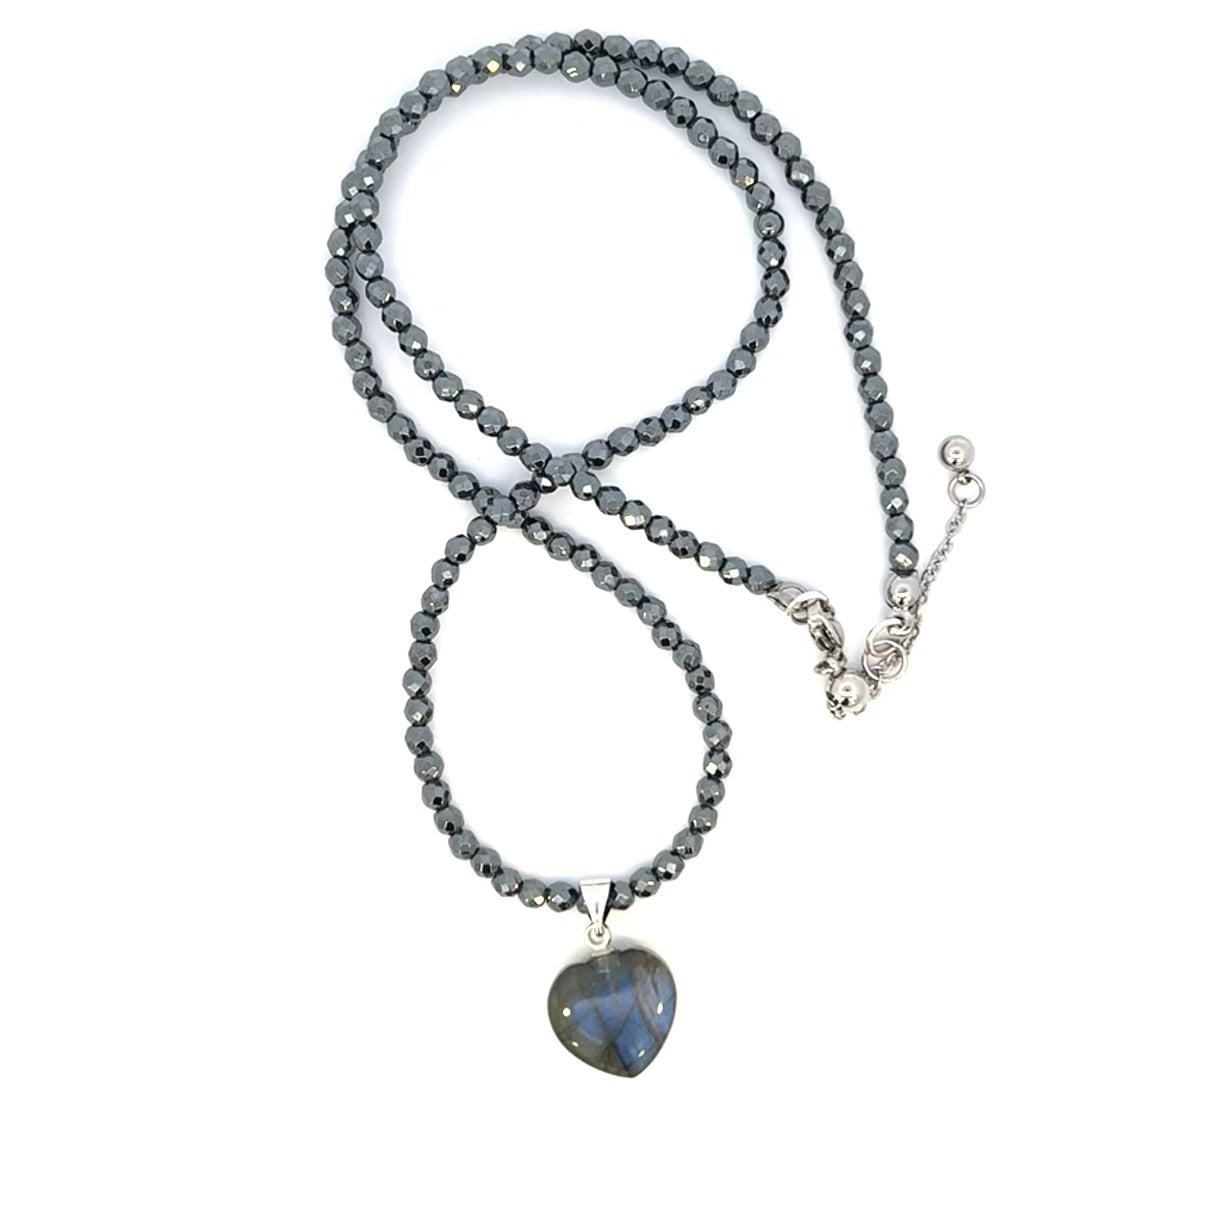 Labradorite Puffy Heart Pendant With Hematite Chain Necklace Stainless